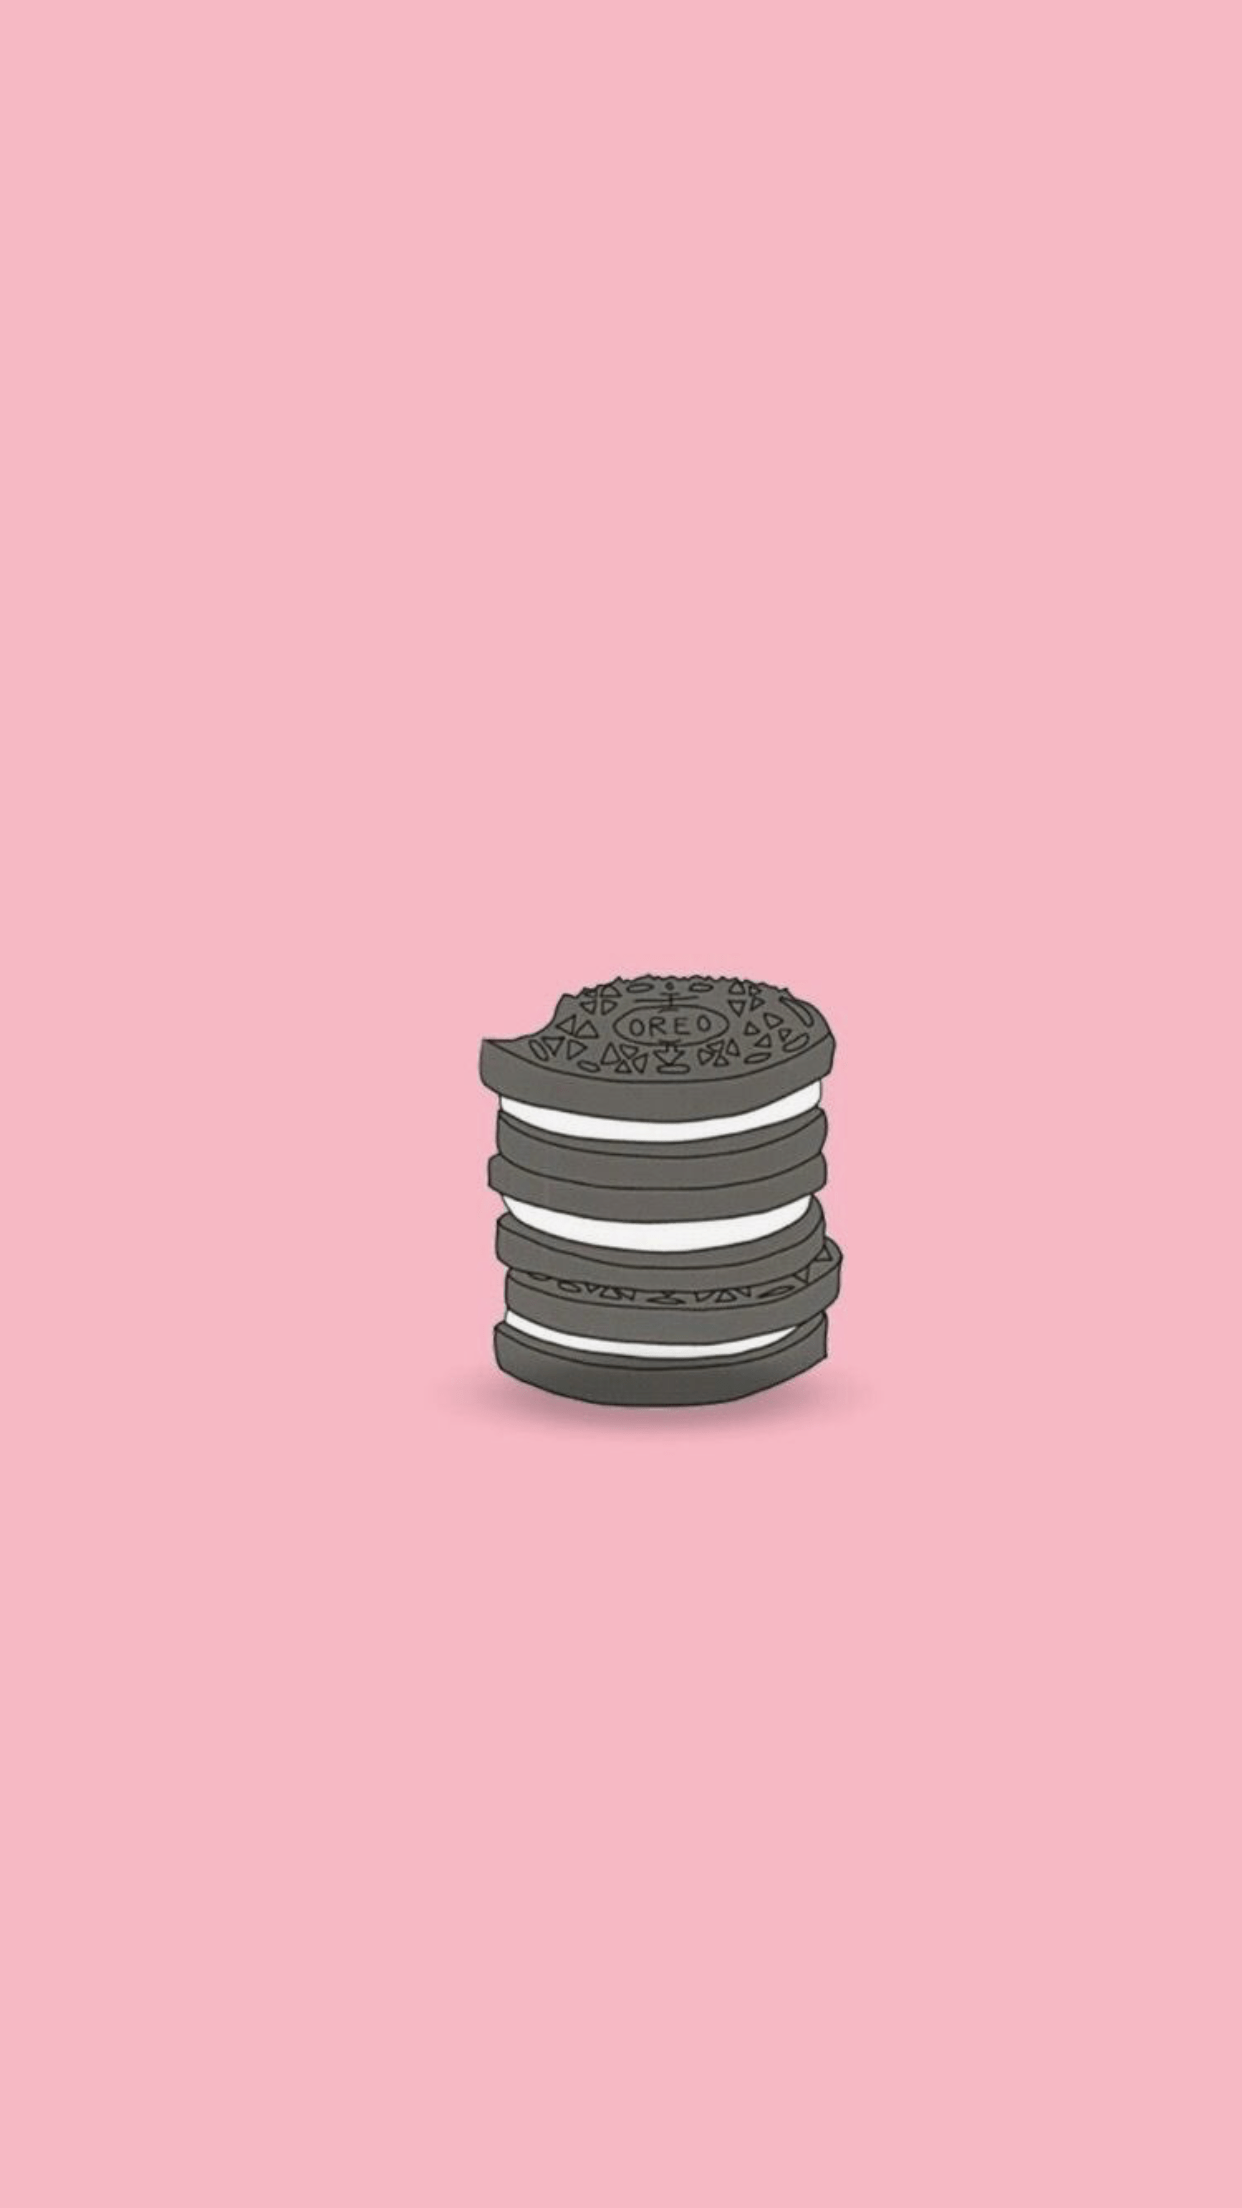 A stack of oreo cookies on pink background - Oreo, food, foodie